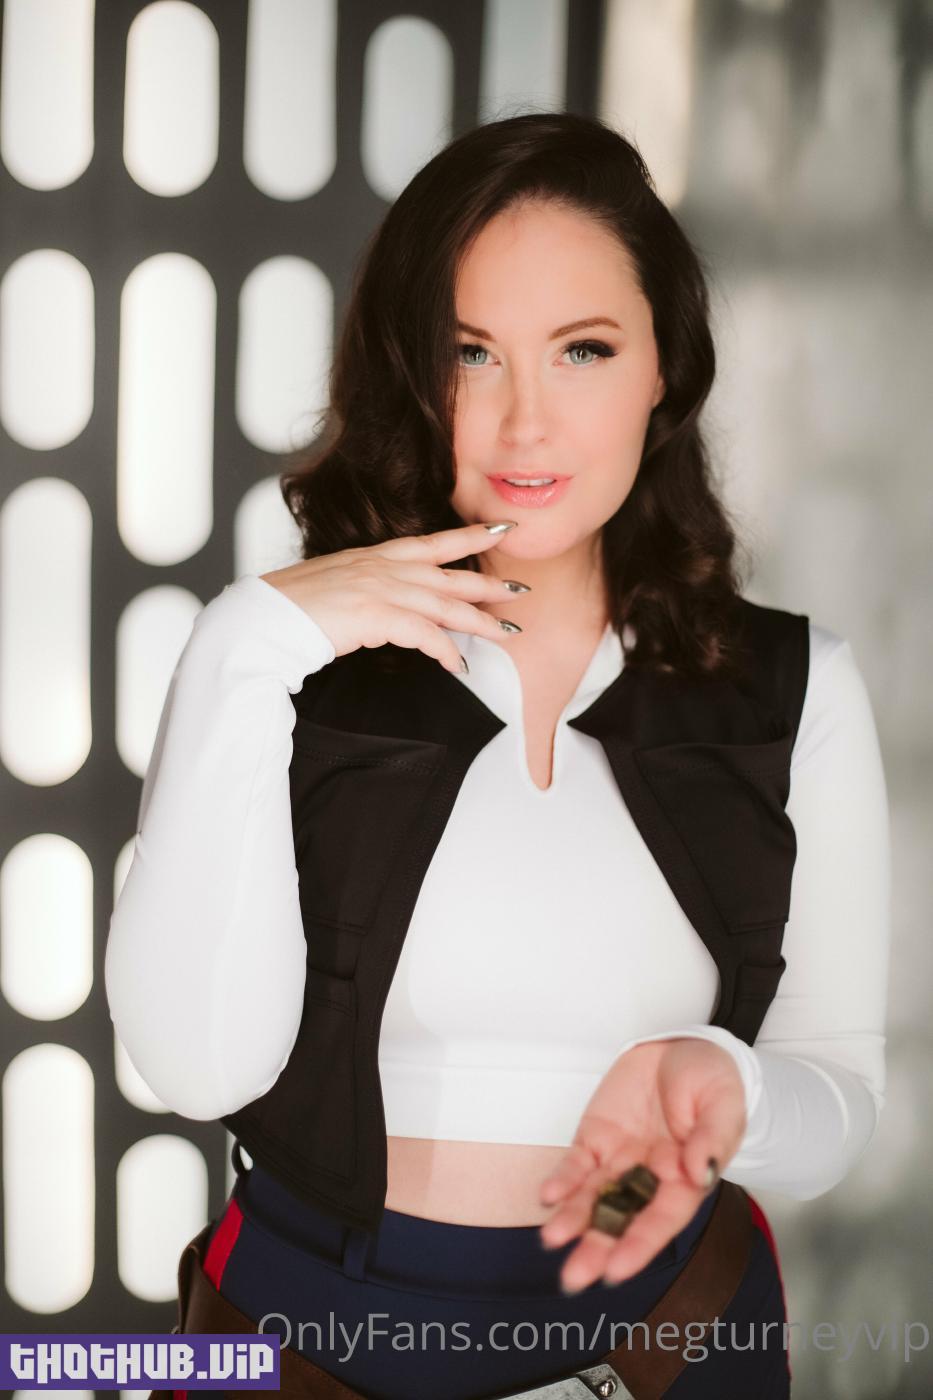 1662430471 354 Meg Turney Nude Han Solo Cosplay Onlyfans Video Leaked